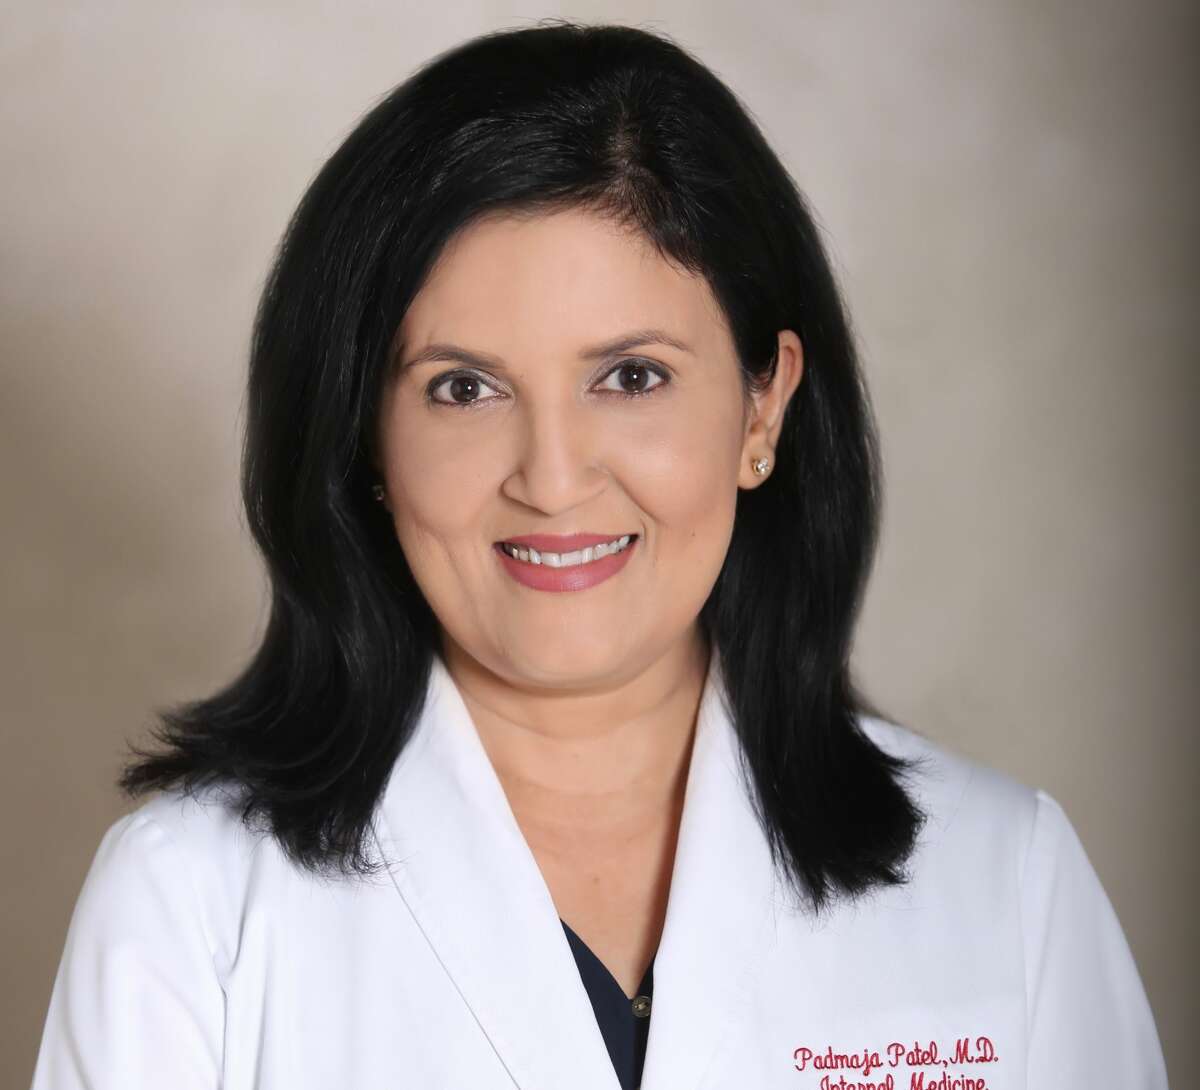 By Dr. Padmaja Patel is medical director of the Lifestyle Medicine Center.